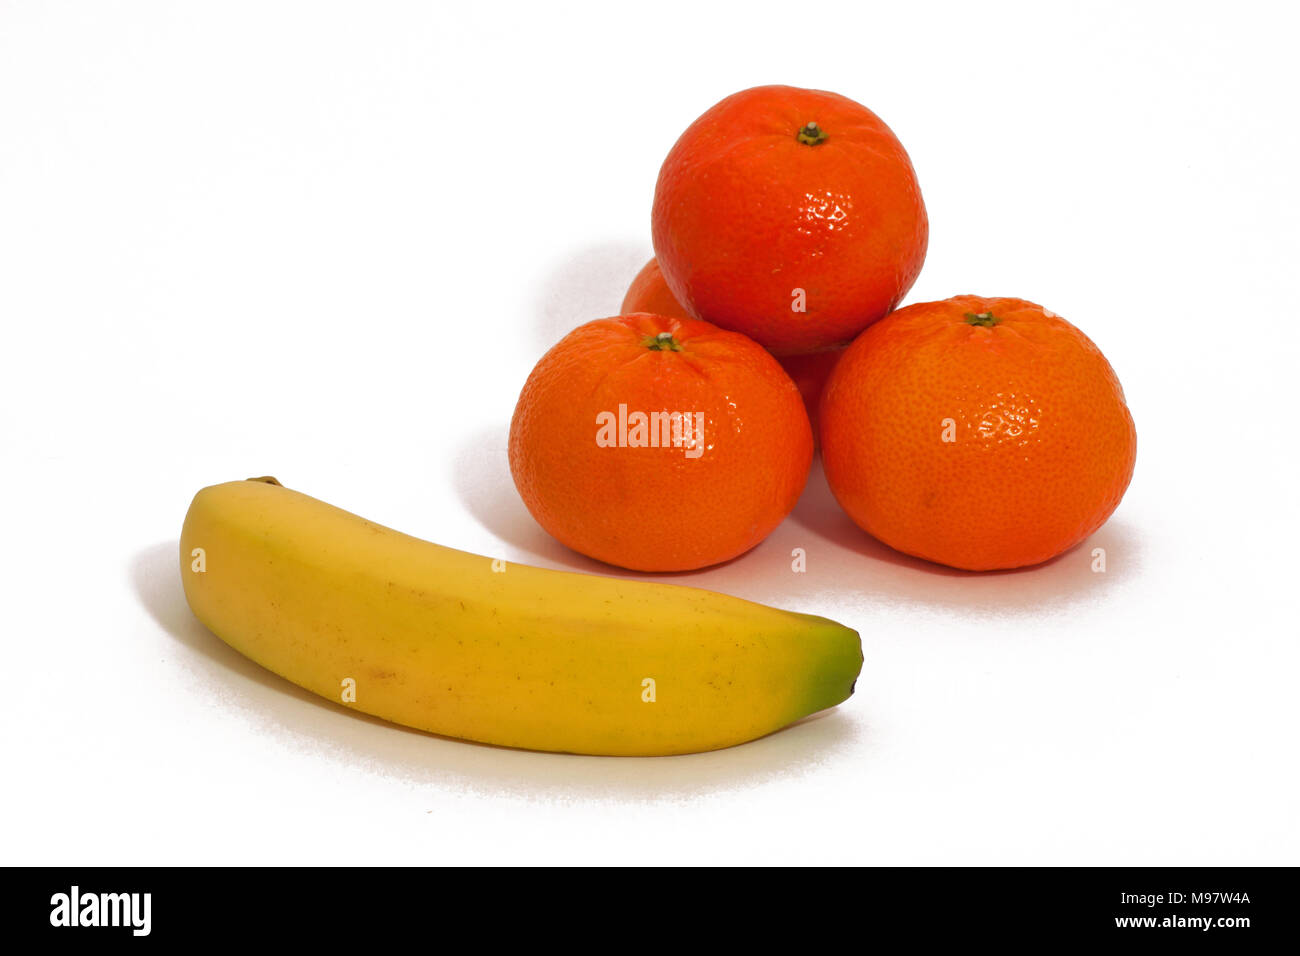 Stacked Oranges And A Banana With White Background Isolated Stock Photo